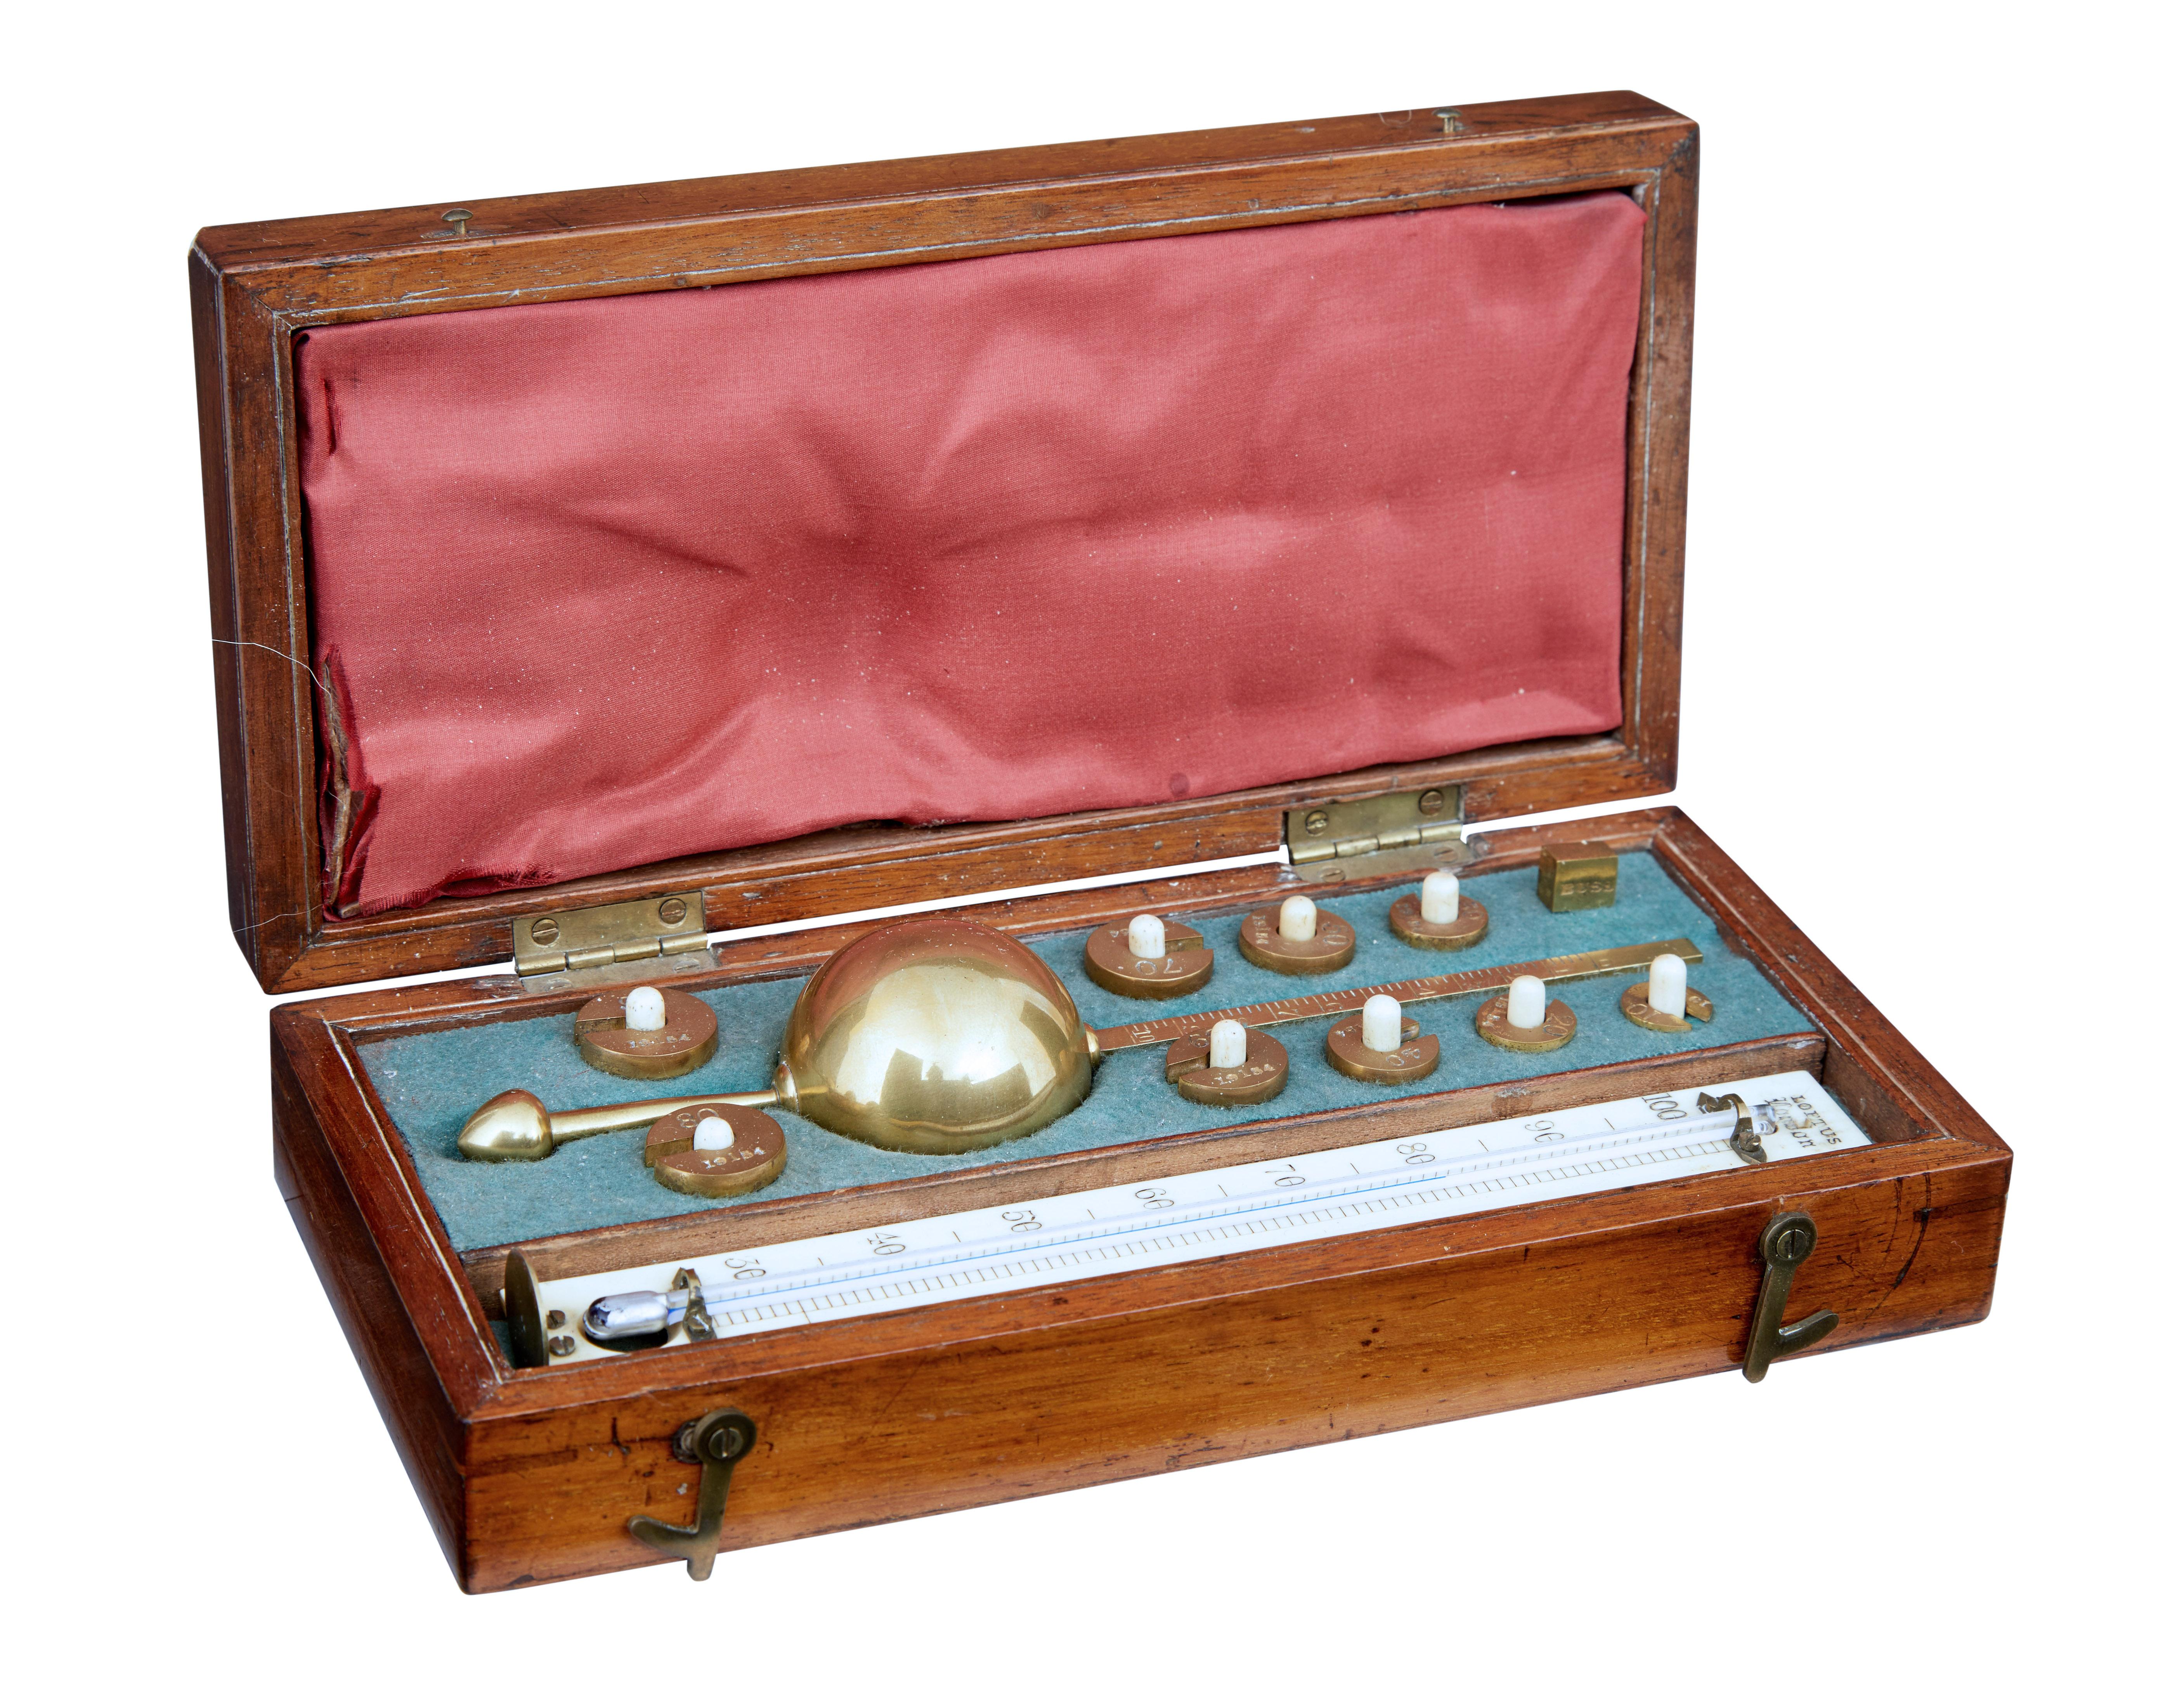 Good quality Victorian Sikes scientific measuring set.

Presented in original mahogany case with bone cartouche buss 33 hatton garden london, also with a secondary cartouche of it being re-adjusted by w.R loftus ltd of 18 tottenham court